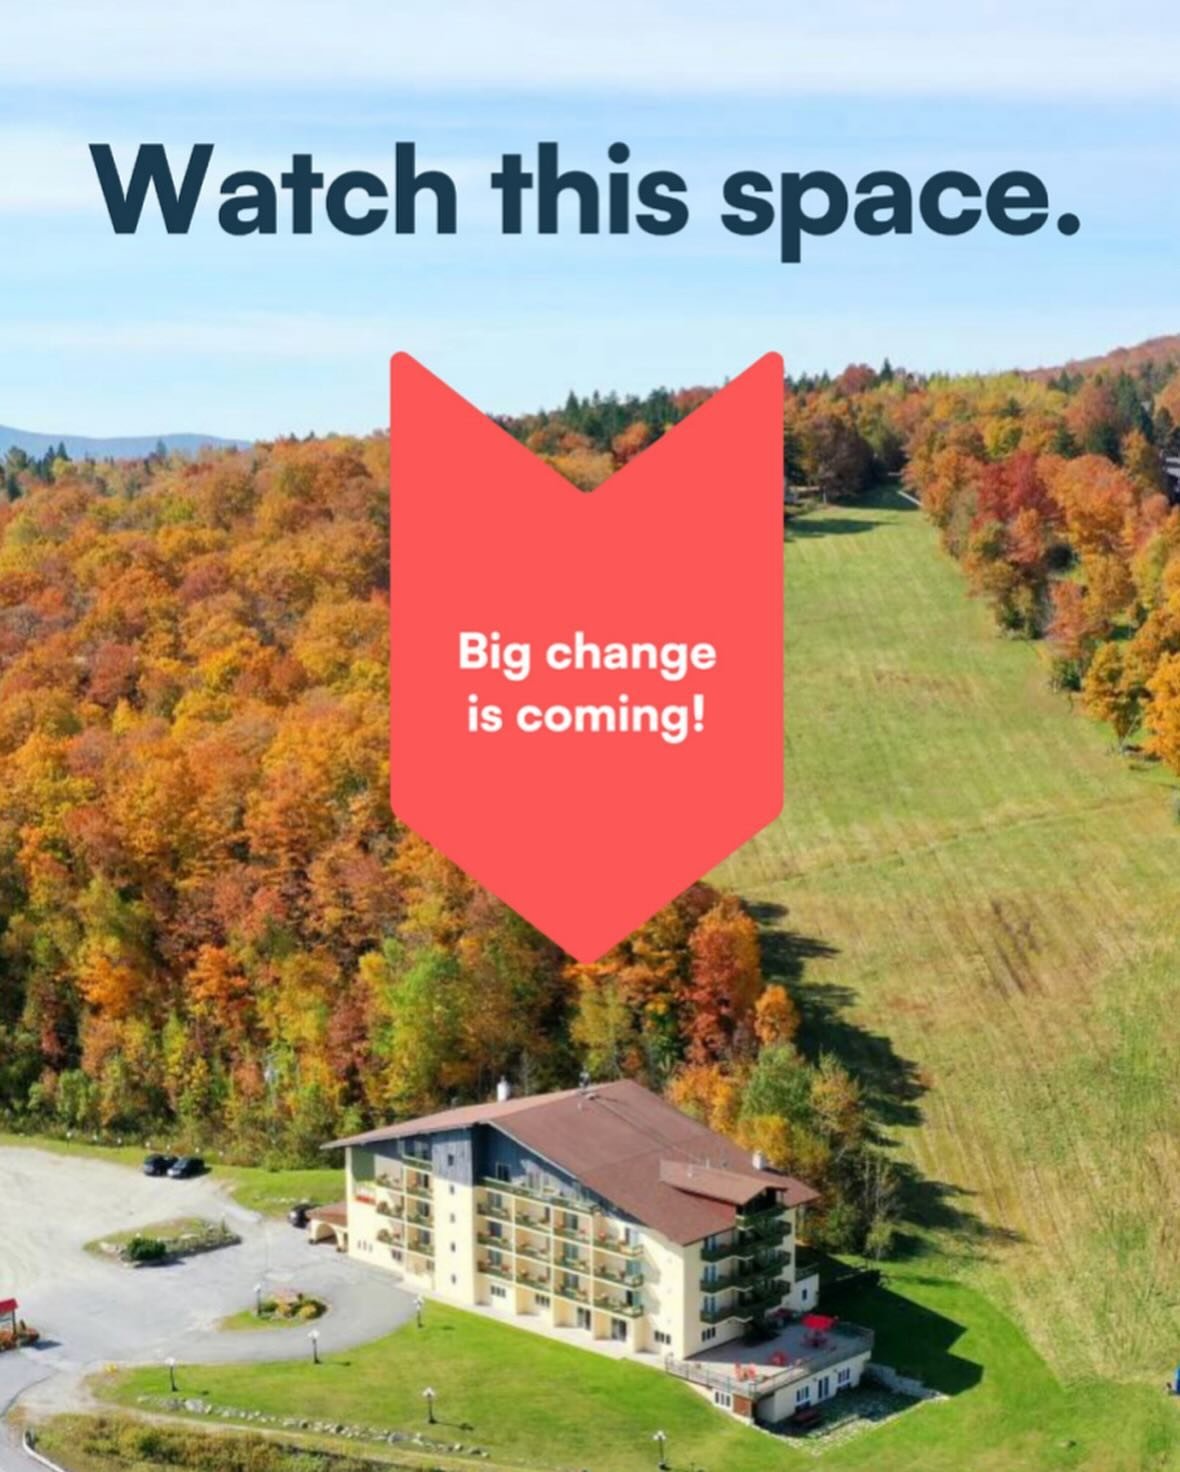 The Lodge at Bromley is now closed for renovations! Thank you to all our guests and friends in the community. We look forward to welcoming you back to the Sun Lodge in December of this year! Stay tuned for more!